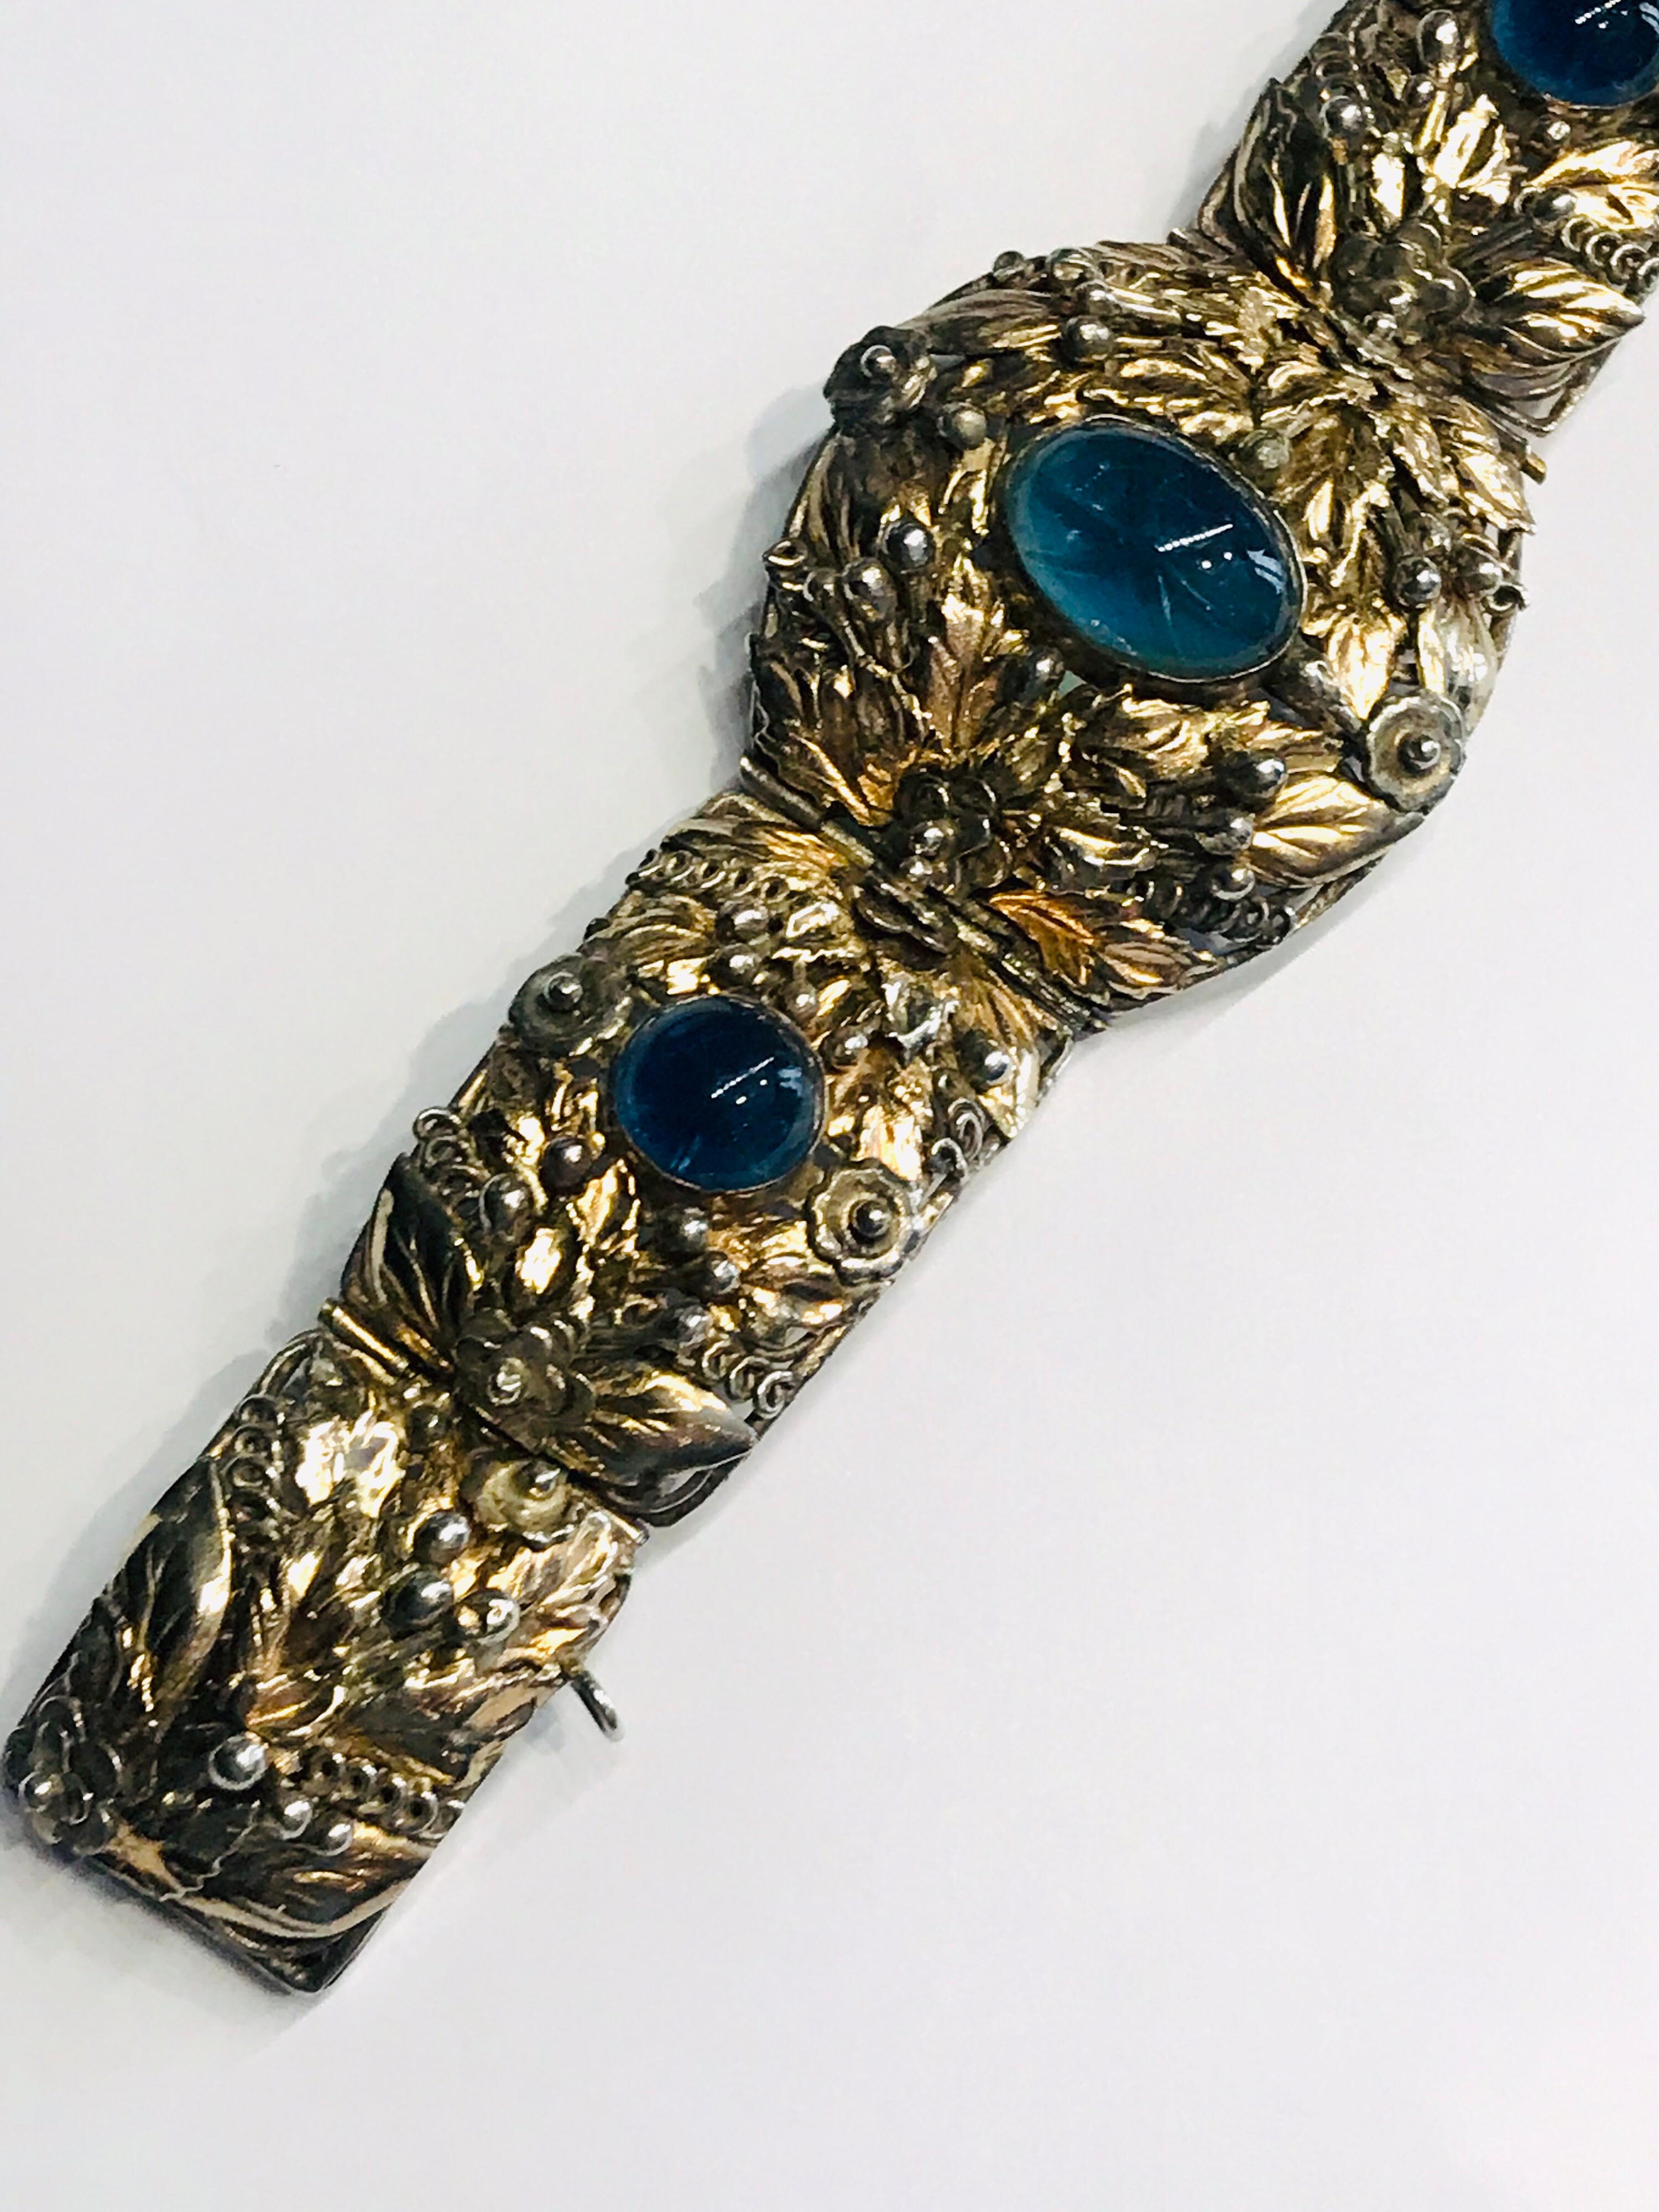 A beautifully constructed hand made bracelet by famous American jewelry company Hobe' between 1941 and 1947. The bracelet has an intricate foliate design of gilt leaves, berries and curled vines on six panel links. Mounted with three blue glass